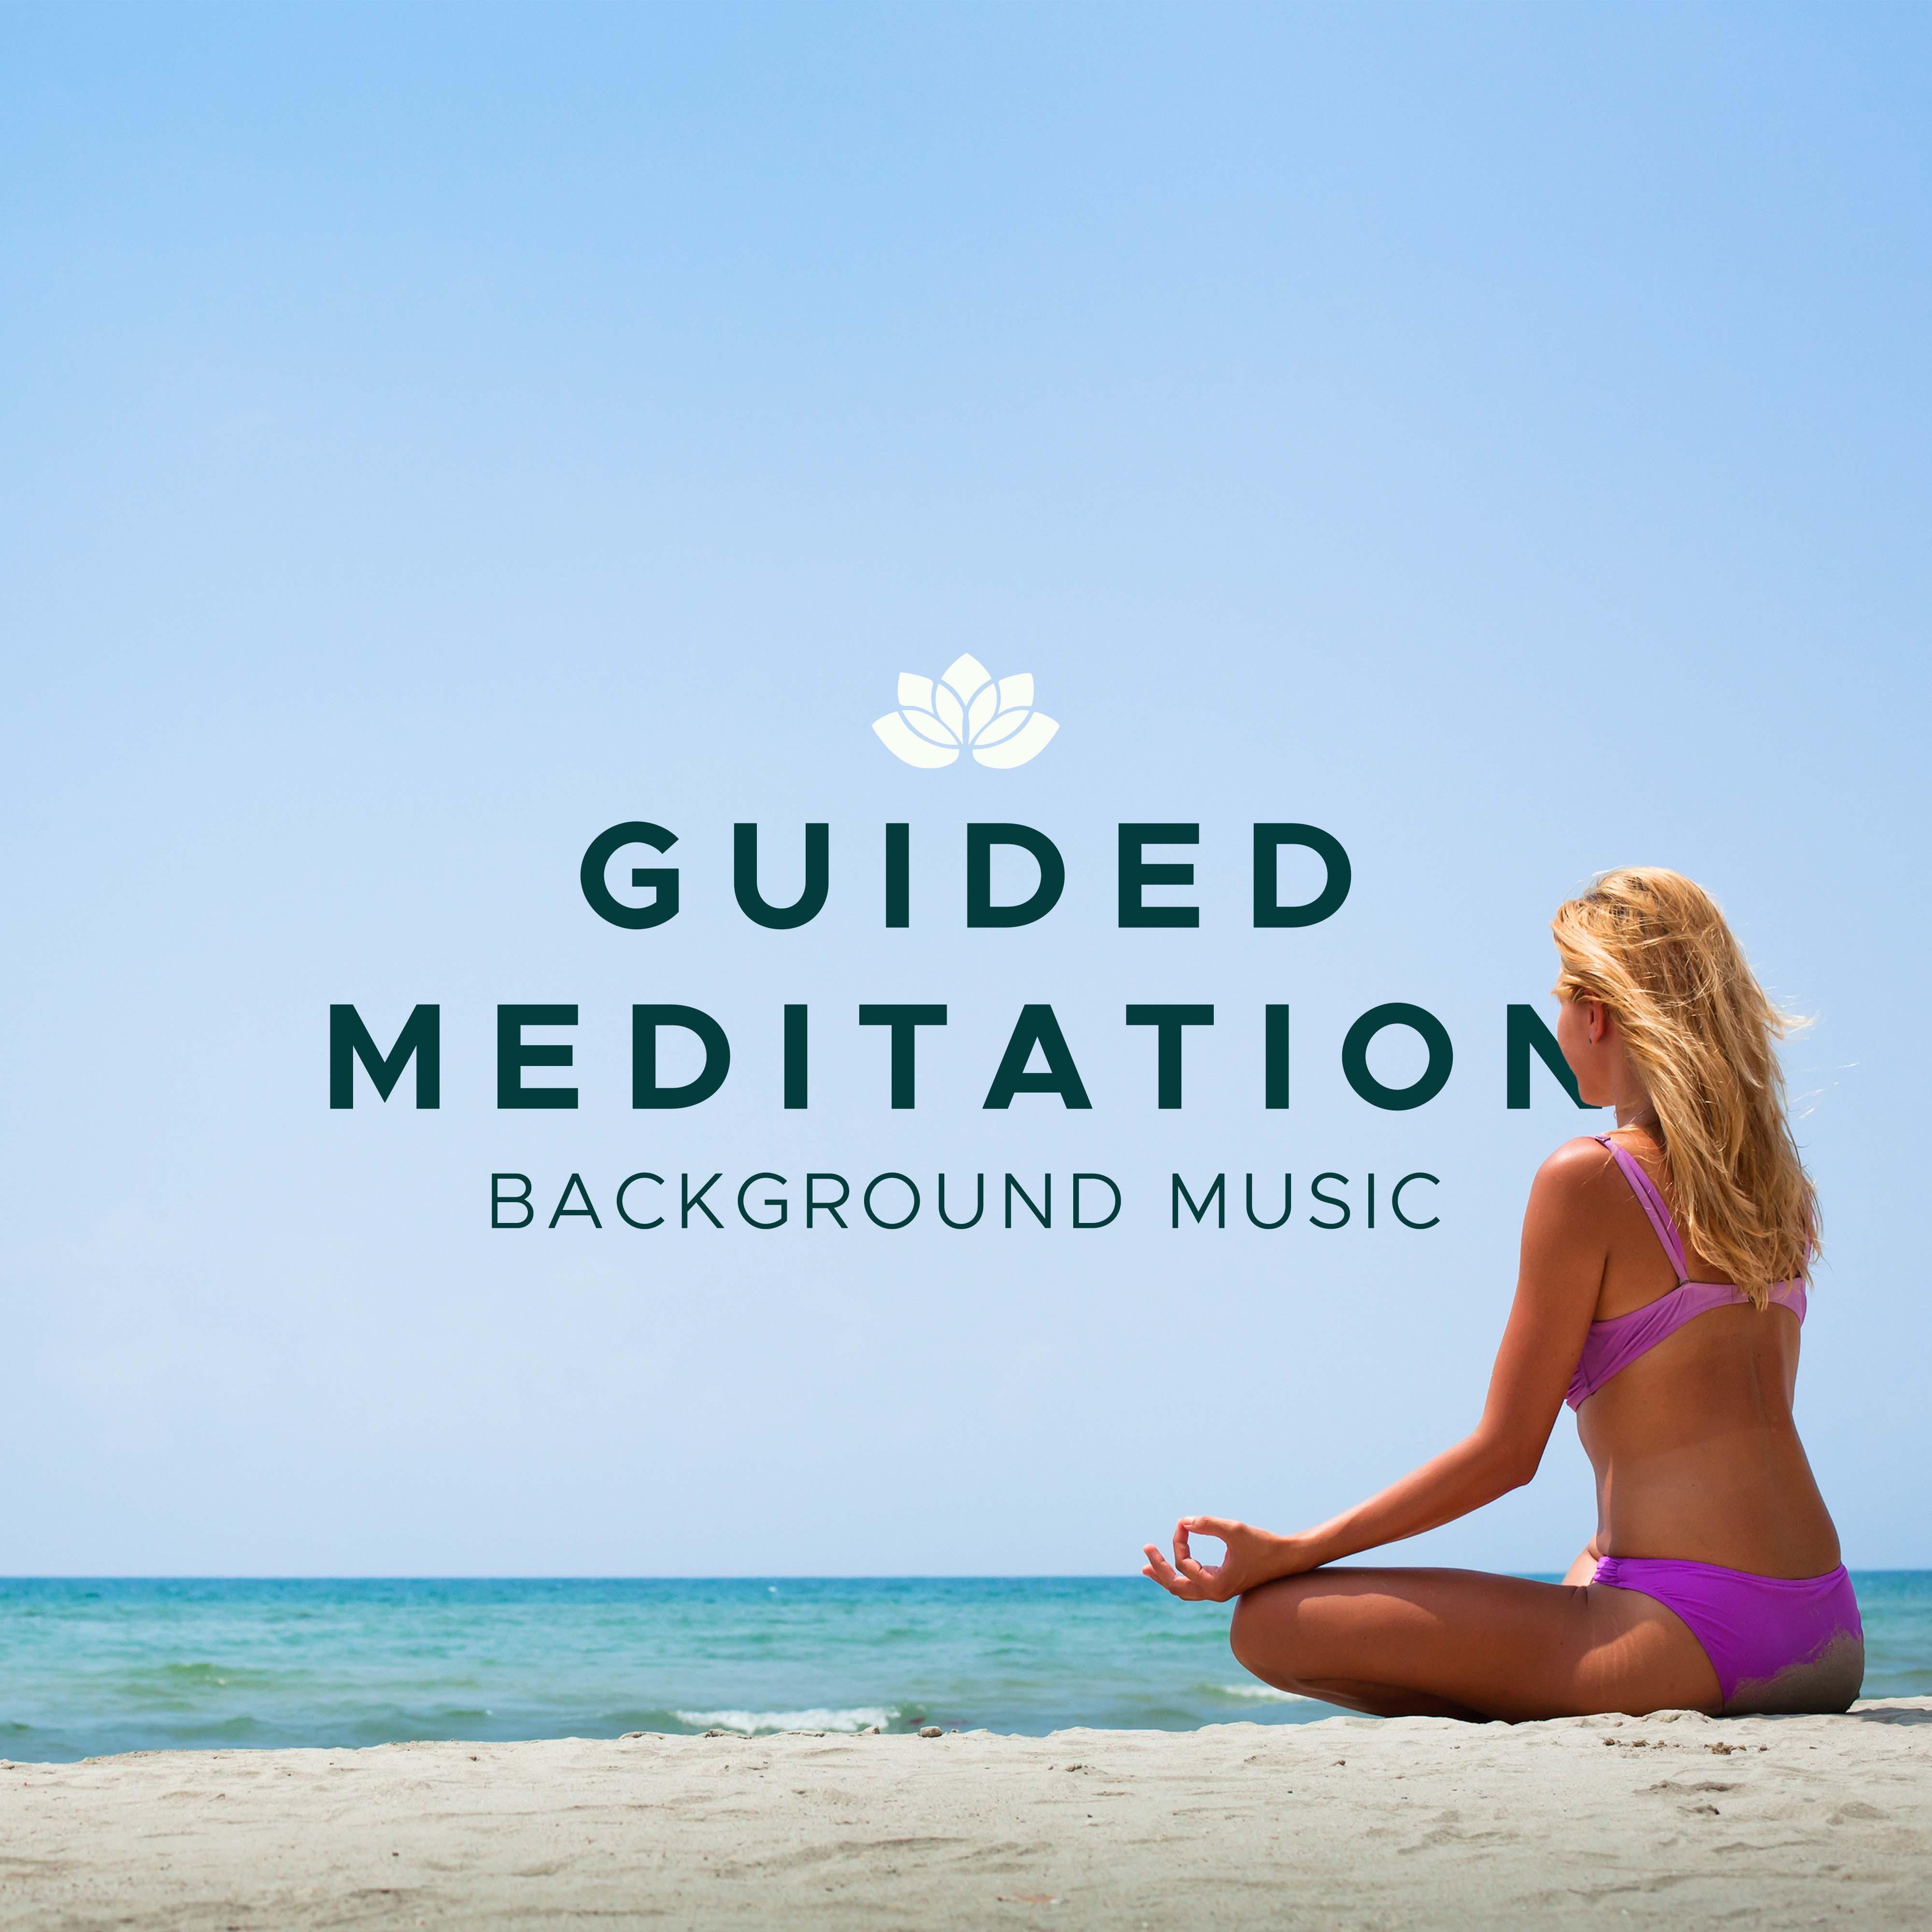 Guided Meditation - Premium Background Music for your Guided Meditation Sessions